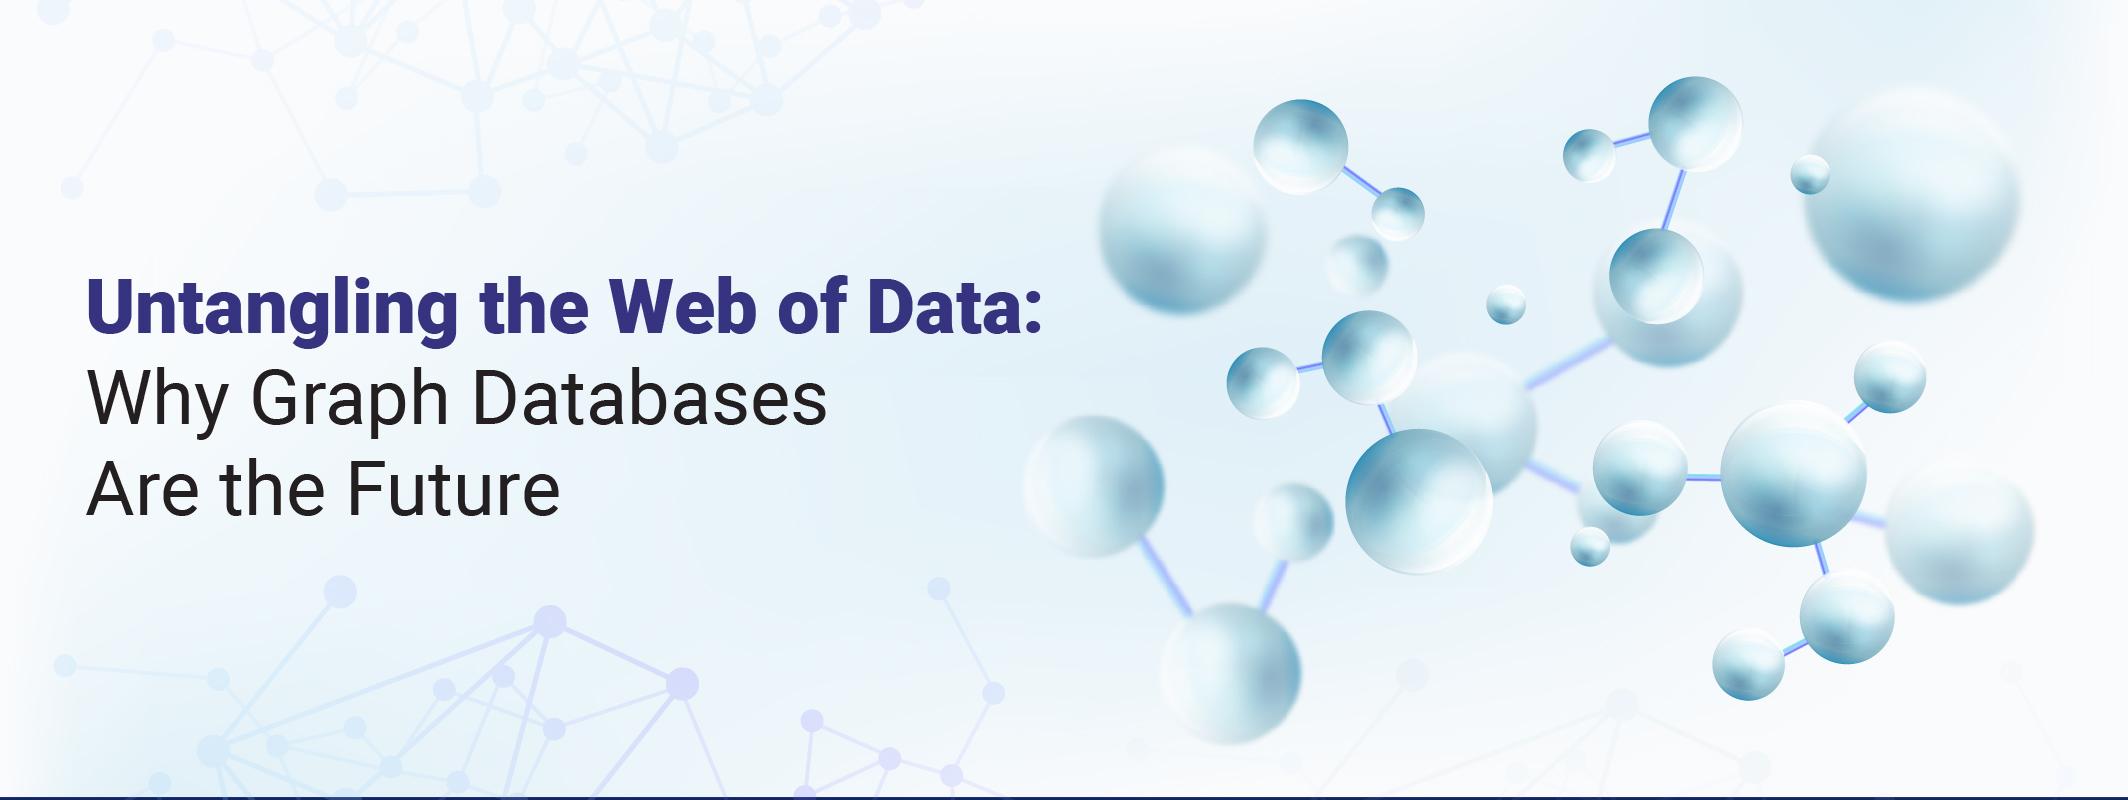 Untangling the Web of Data: Why Graph Databases Are the Future